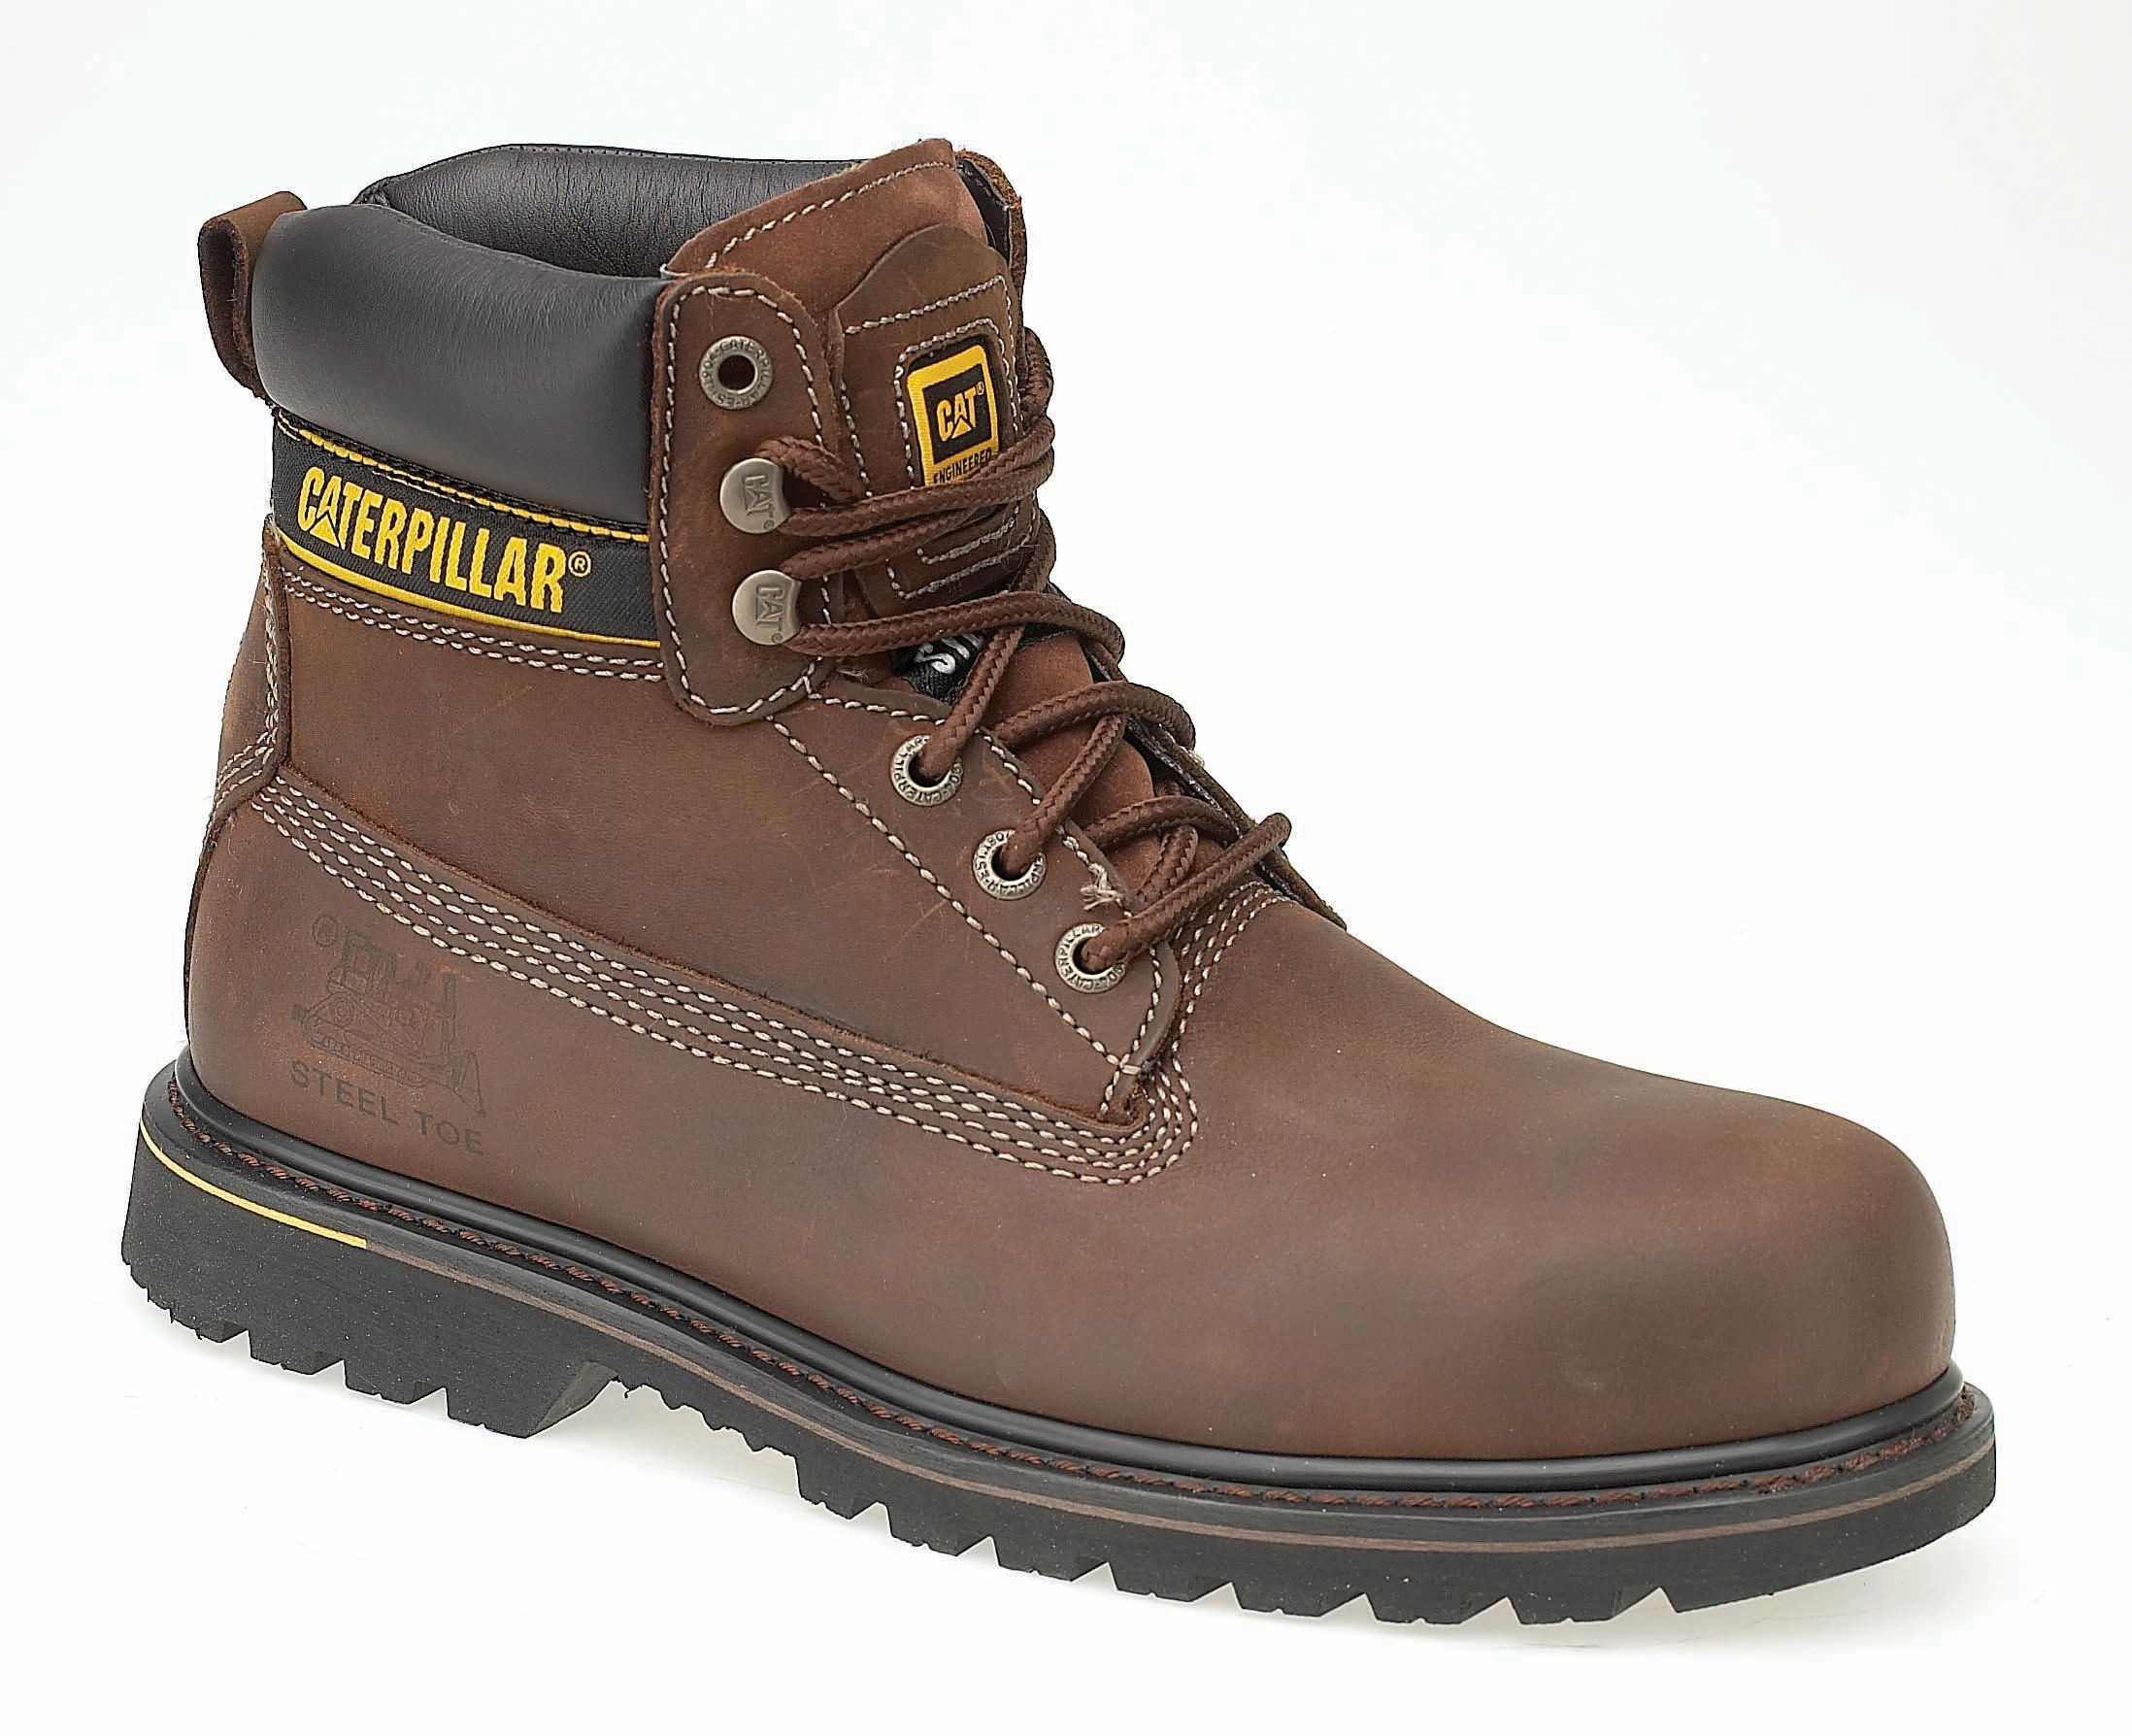 Image of Caterpillar CAT Holton SB Safety Boot - Brown Size 12